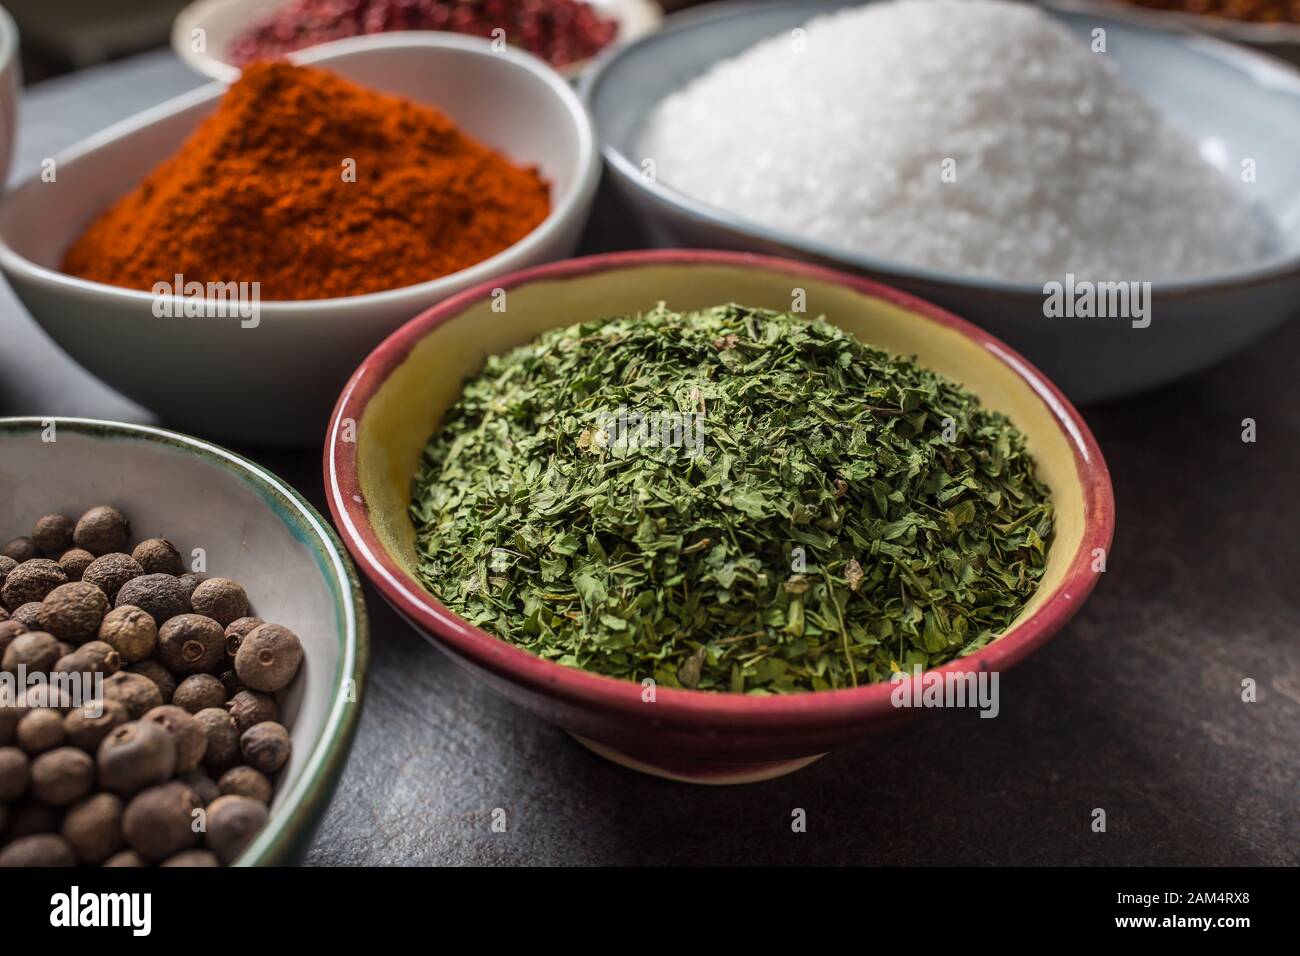 Dried parsley and variety spices and herbs in bowls Stock Photo